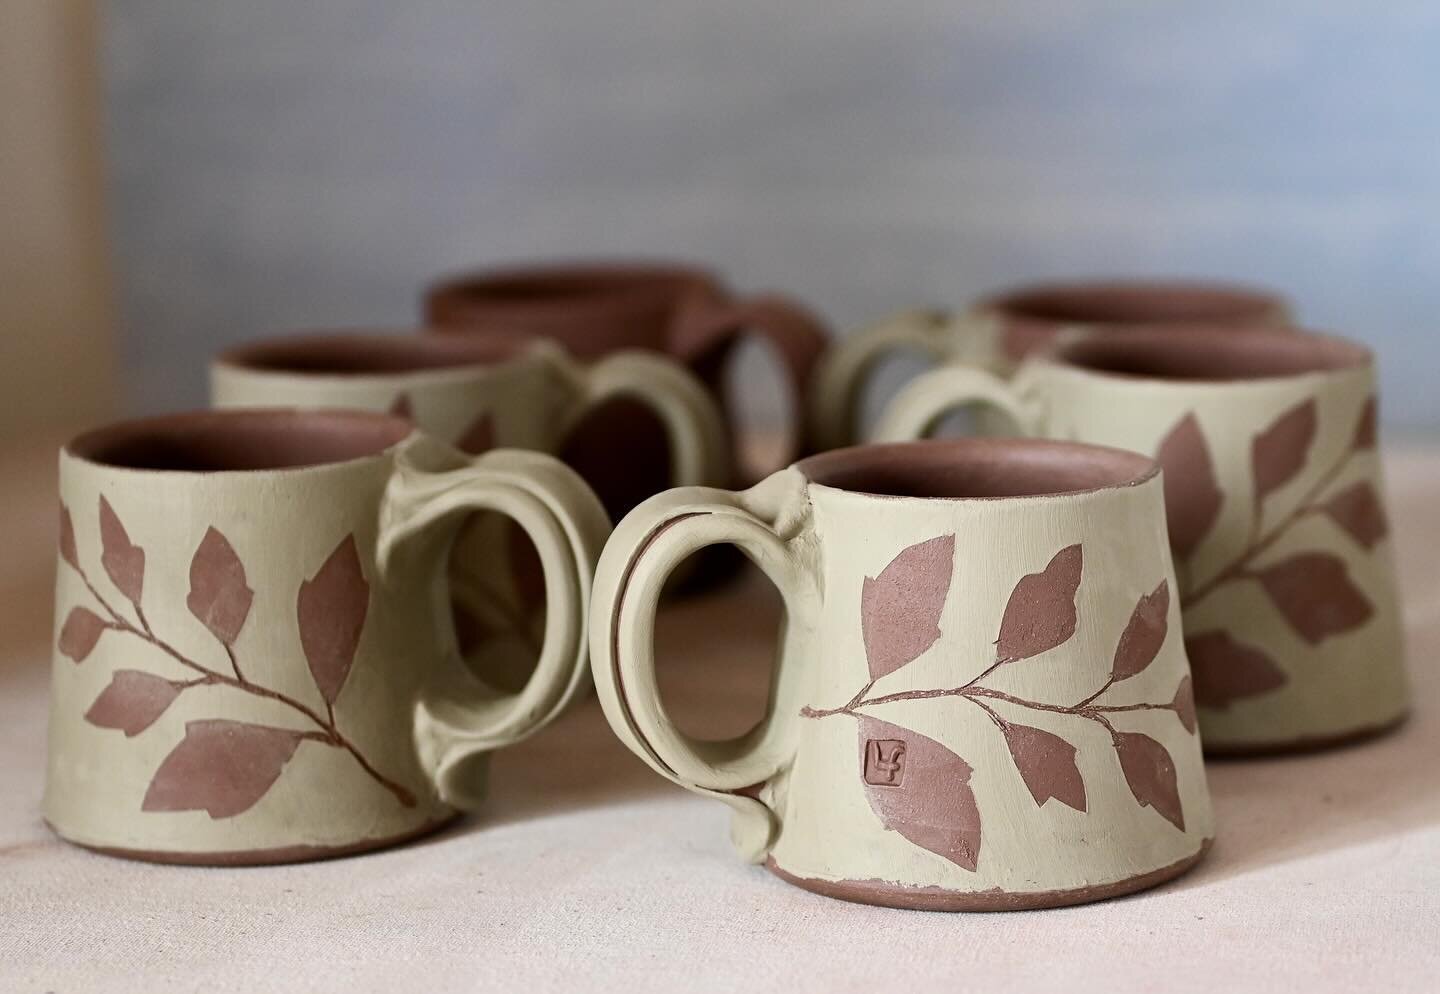 I&rsquo;ve been making 5-6 mugs every few days  instead of 20 at once. This is so my shoulder and hands don&rsquo;t ache so much after holding it high to attach the handle. 🖐🏼🤚🏼💪🏼🤪&hellip;
After the slip decoration, before the bisque firing.
H